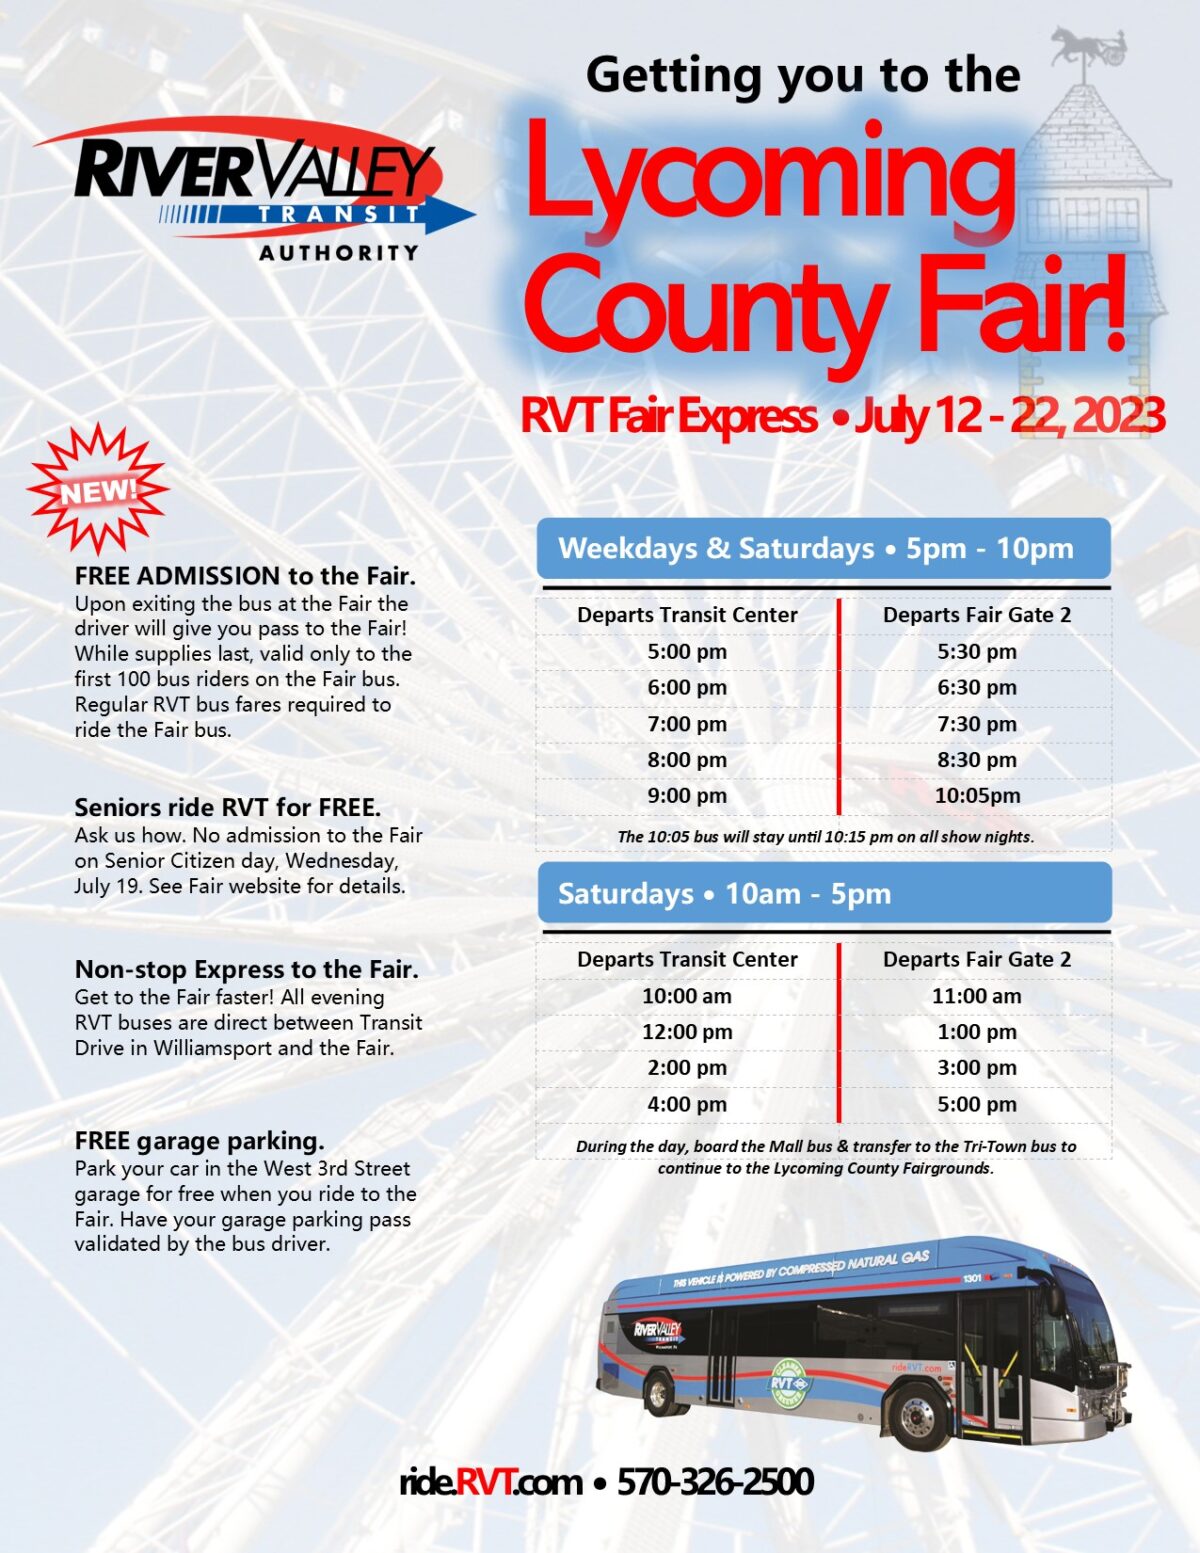 2023 RVT Bus Schedule Lycoming County Fair River Valley Transit Authority